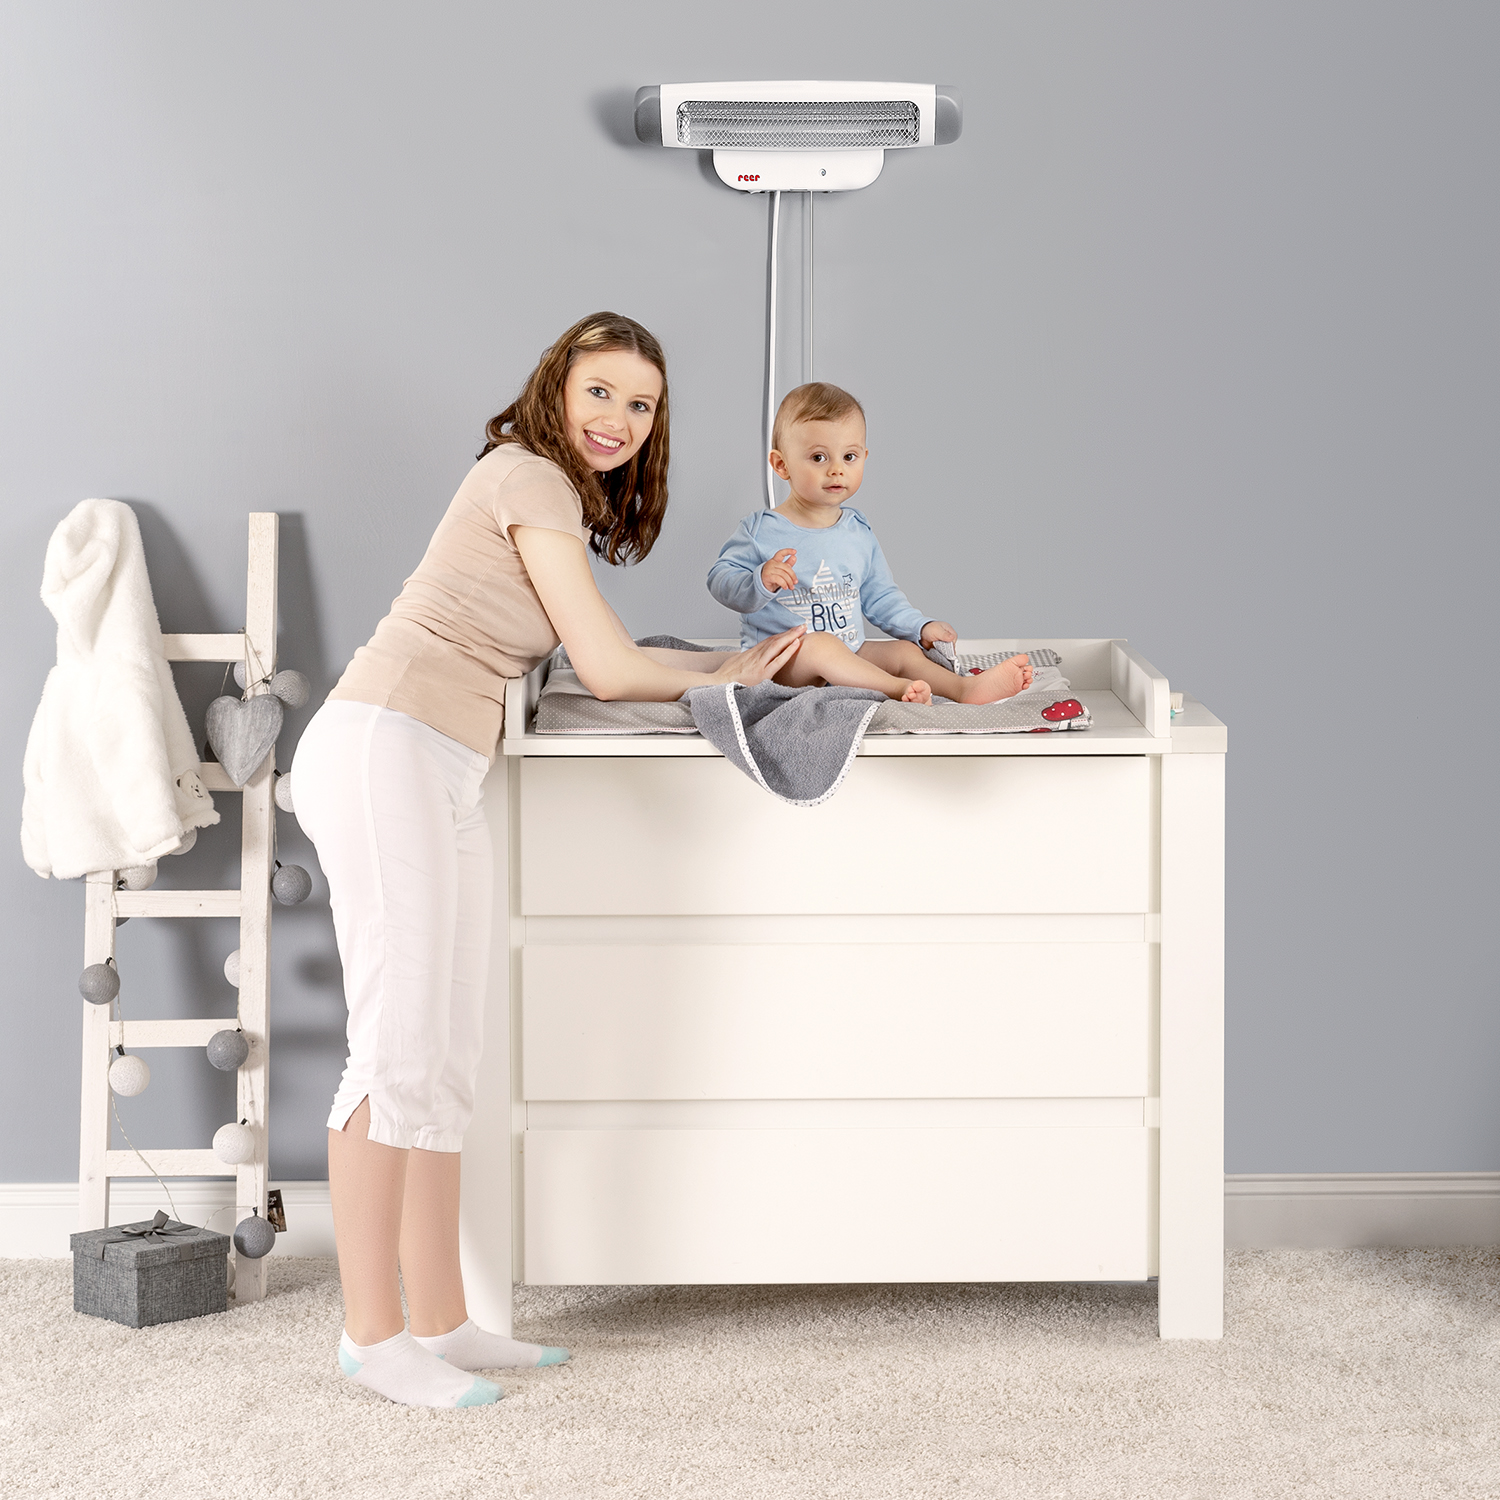 Why changing table heaters?